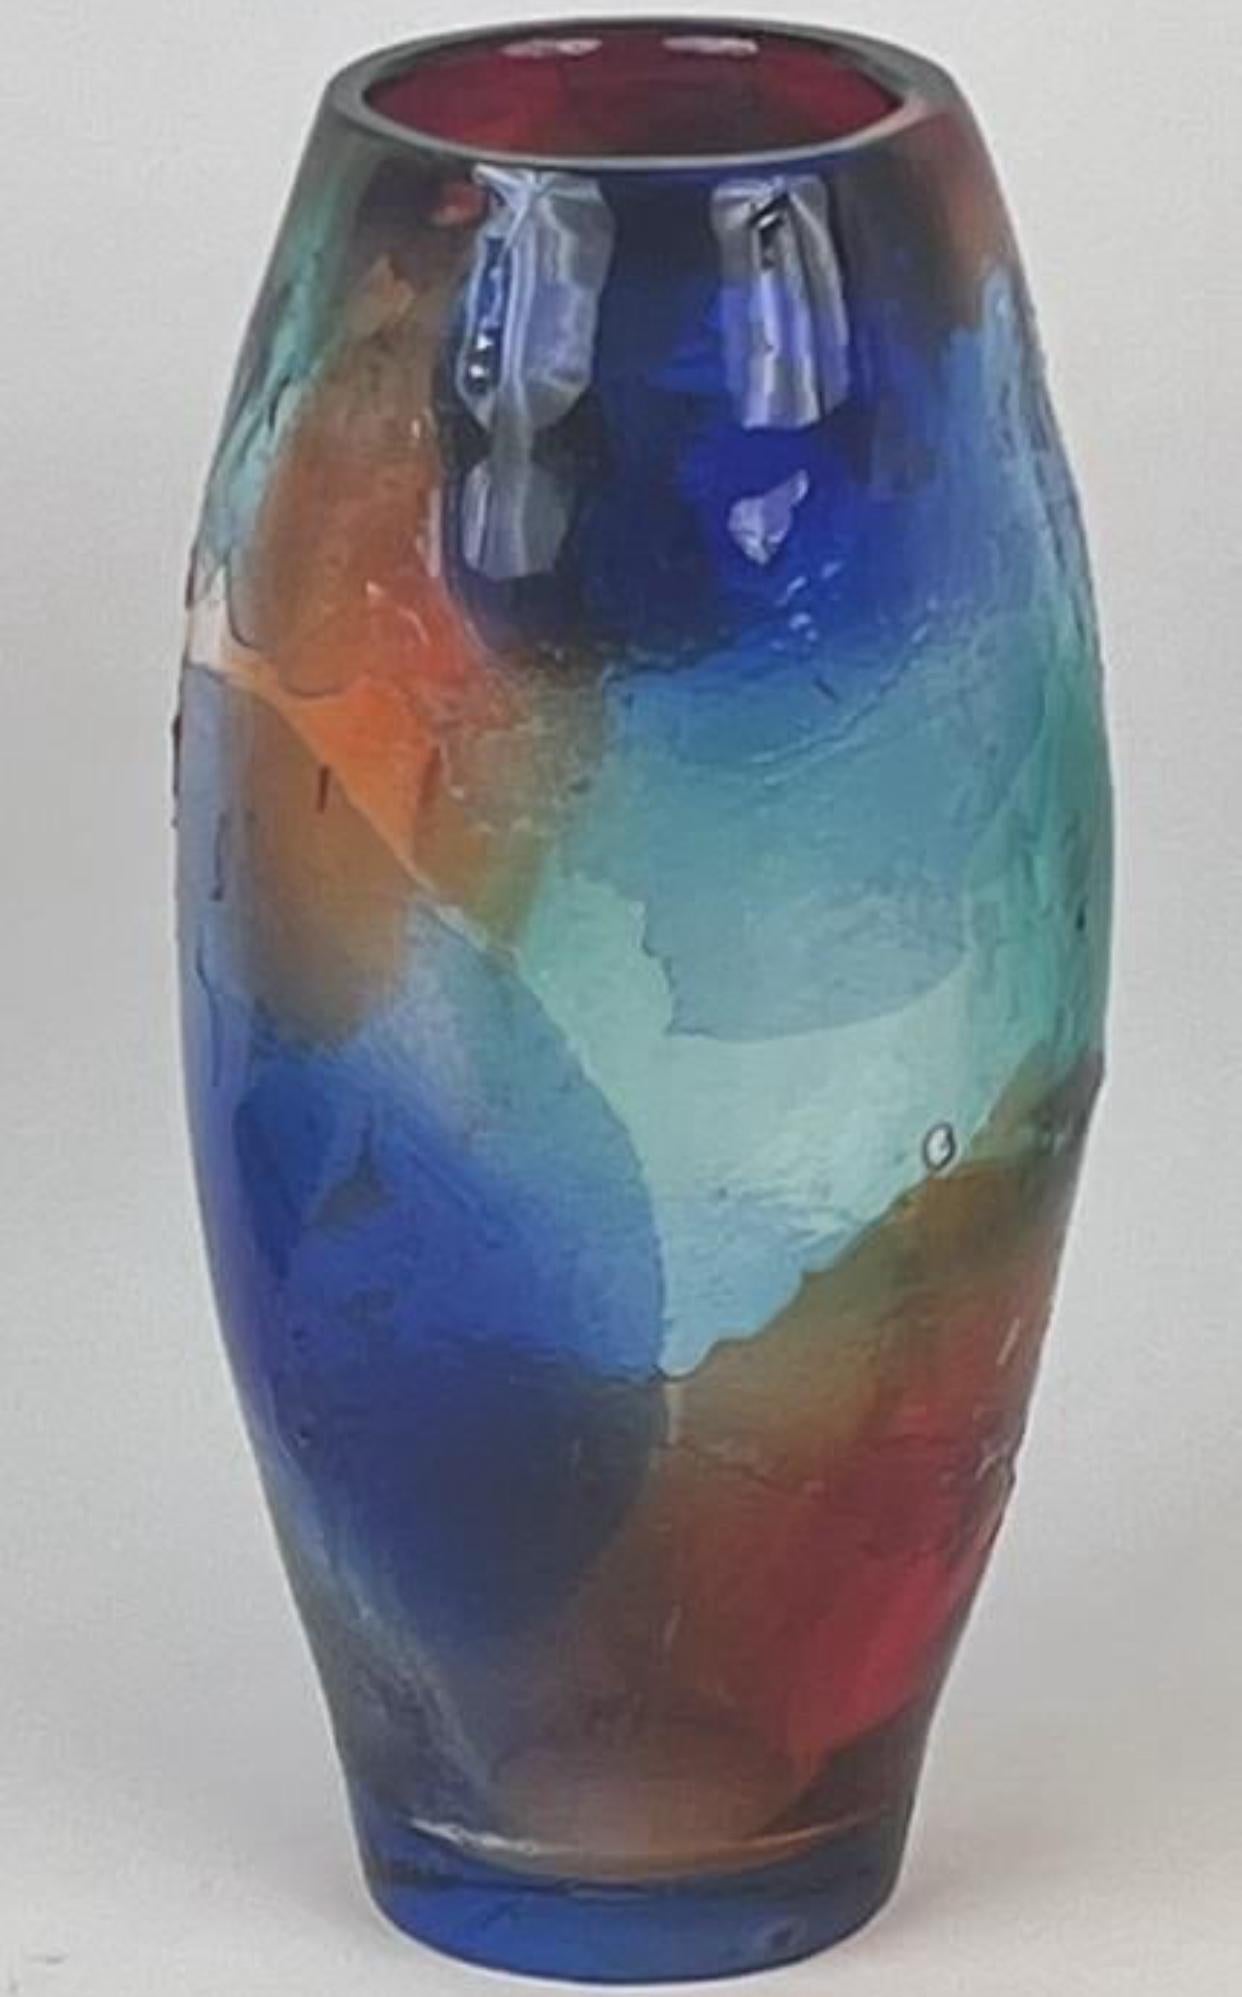 Large and colorful hand blown Murano glass vase by Maestro Giuliano Tosi. Vibrant colors of blue, orange, green and red that blend with and overlap one another. Raised shapes and textures also add to the unique form of this vase by one of the art